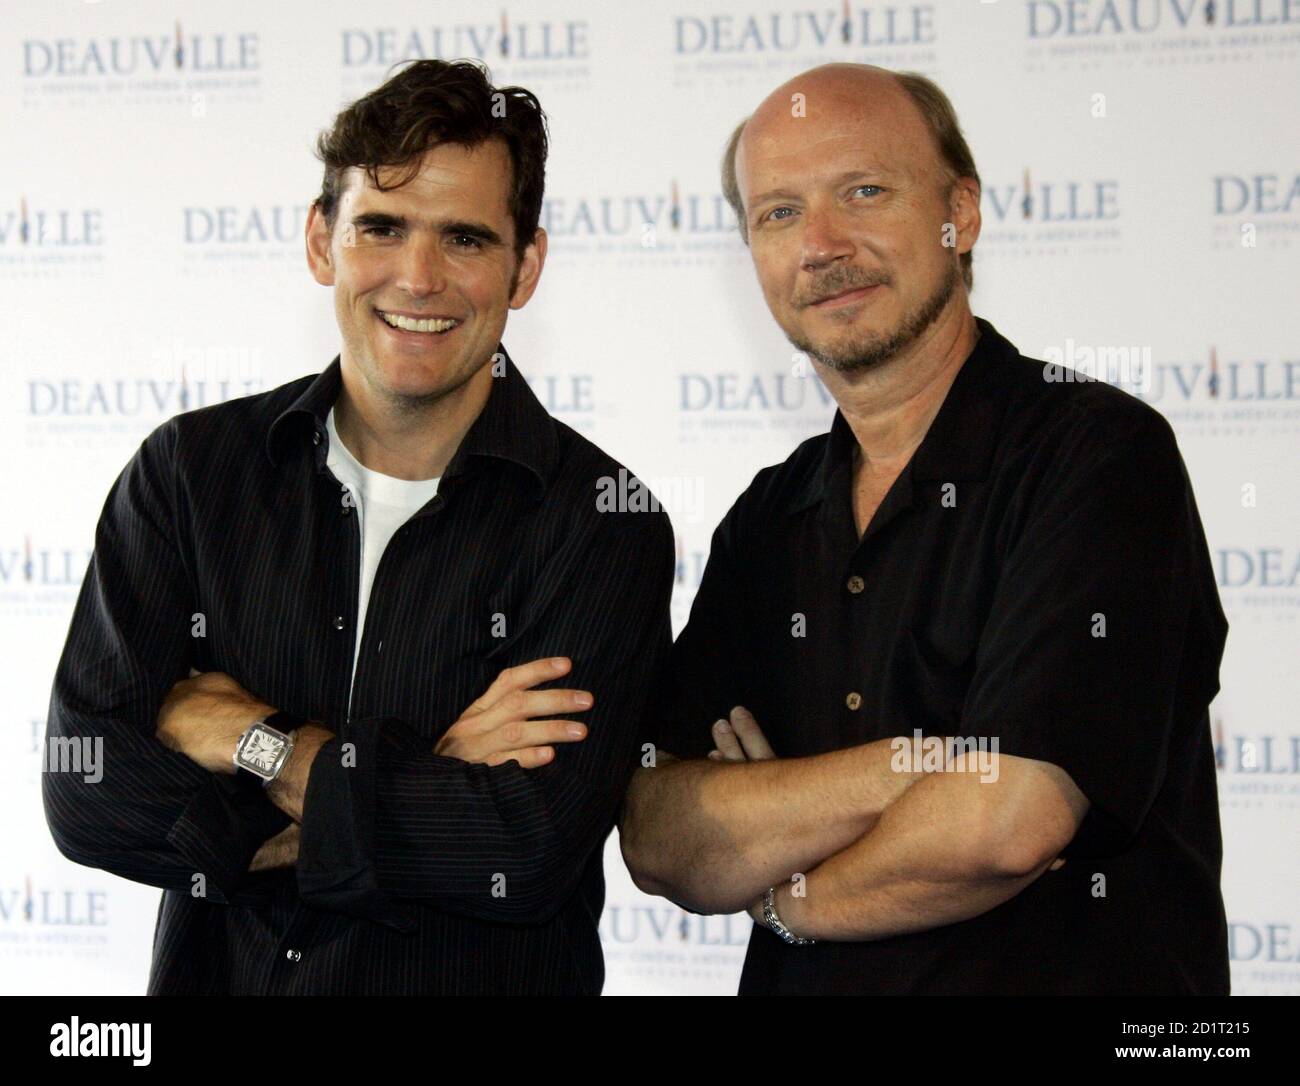 Actor Matt Dillon (L) and director Paul Haggis pose during a photocall for  the presentation of their film "Crash" at the 31th American Film Festival  of Deauville, September 5, 2005. Haggis won